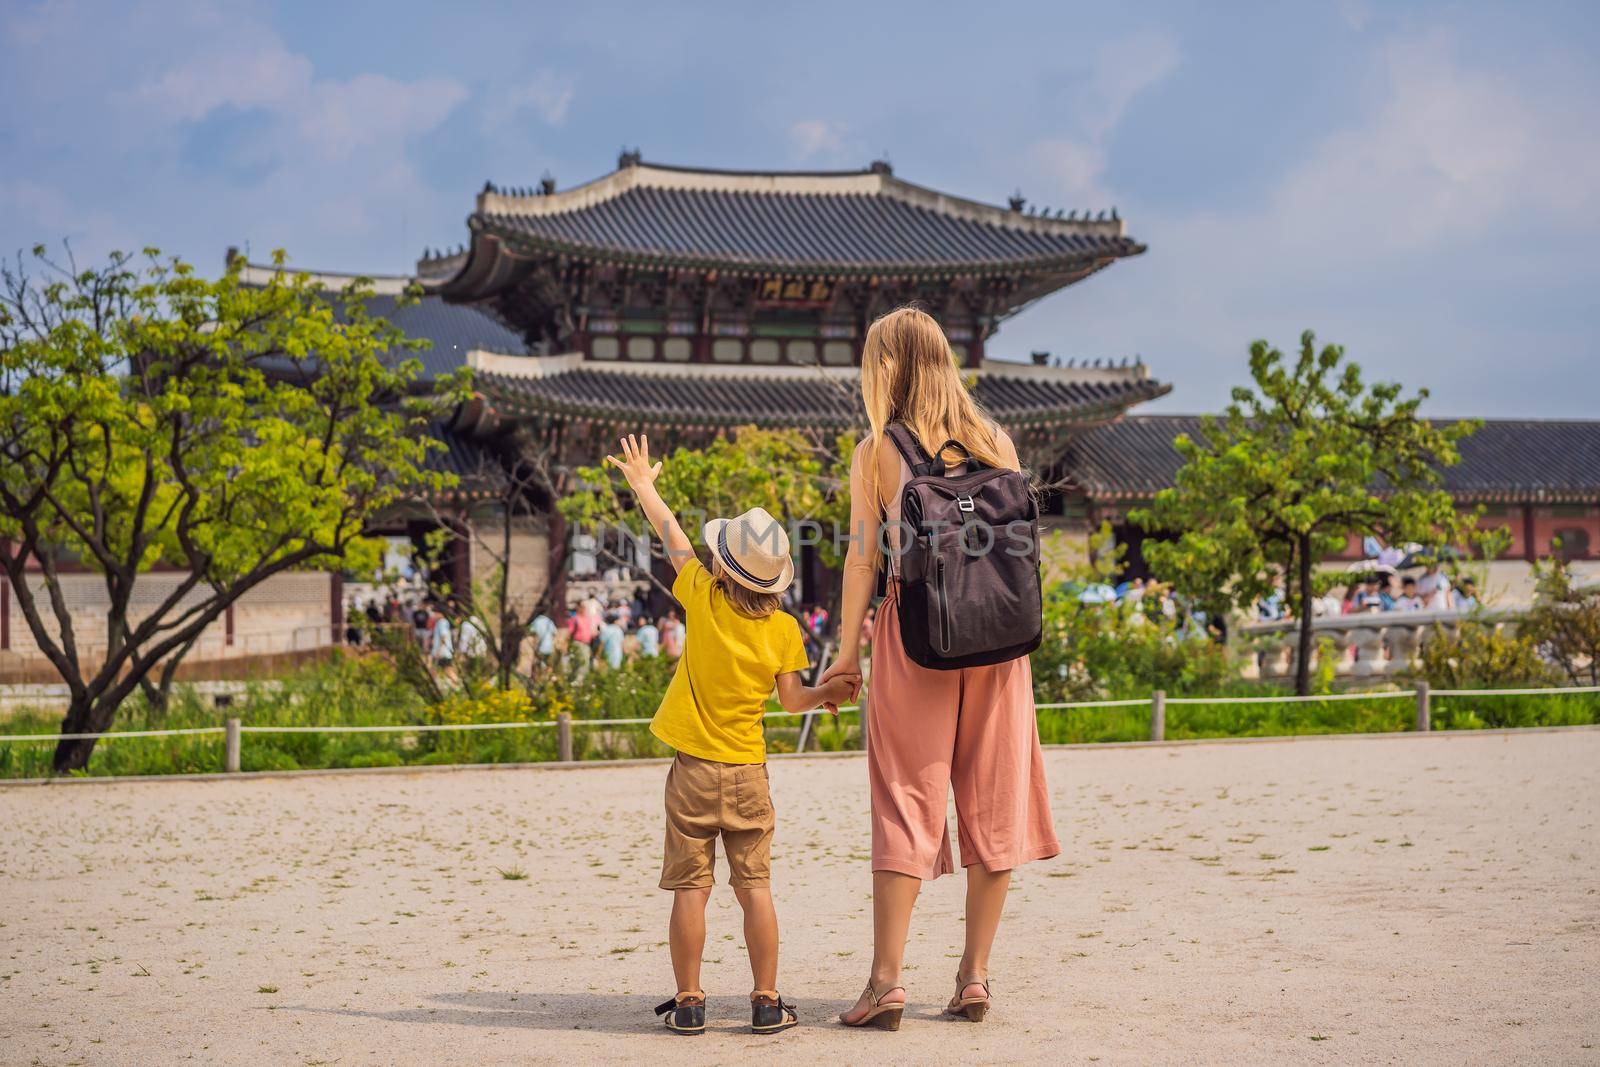 Mom and son tourists in Korea. Gyeongbokgung Palace grounds in Seoul, South Korea. Travel to Korea concept. Traveling with children concept.